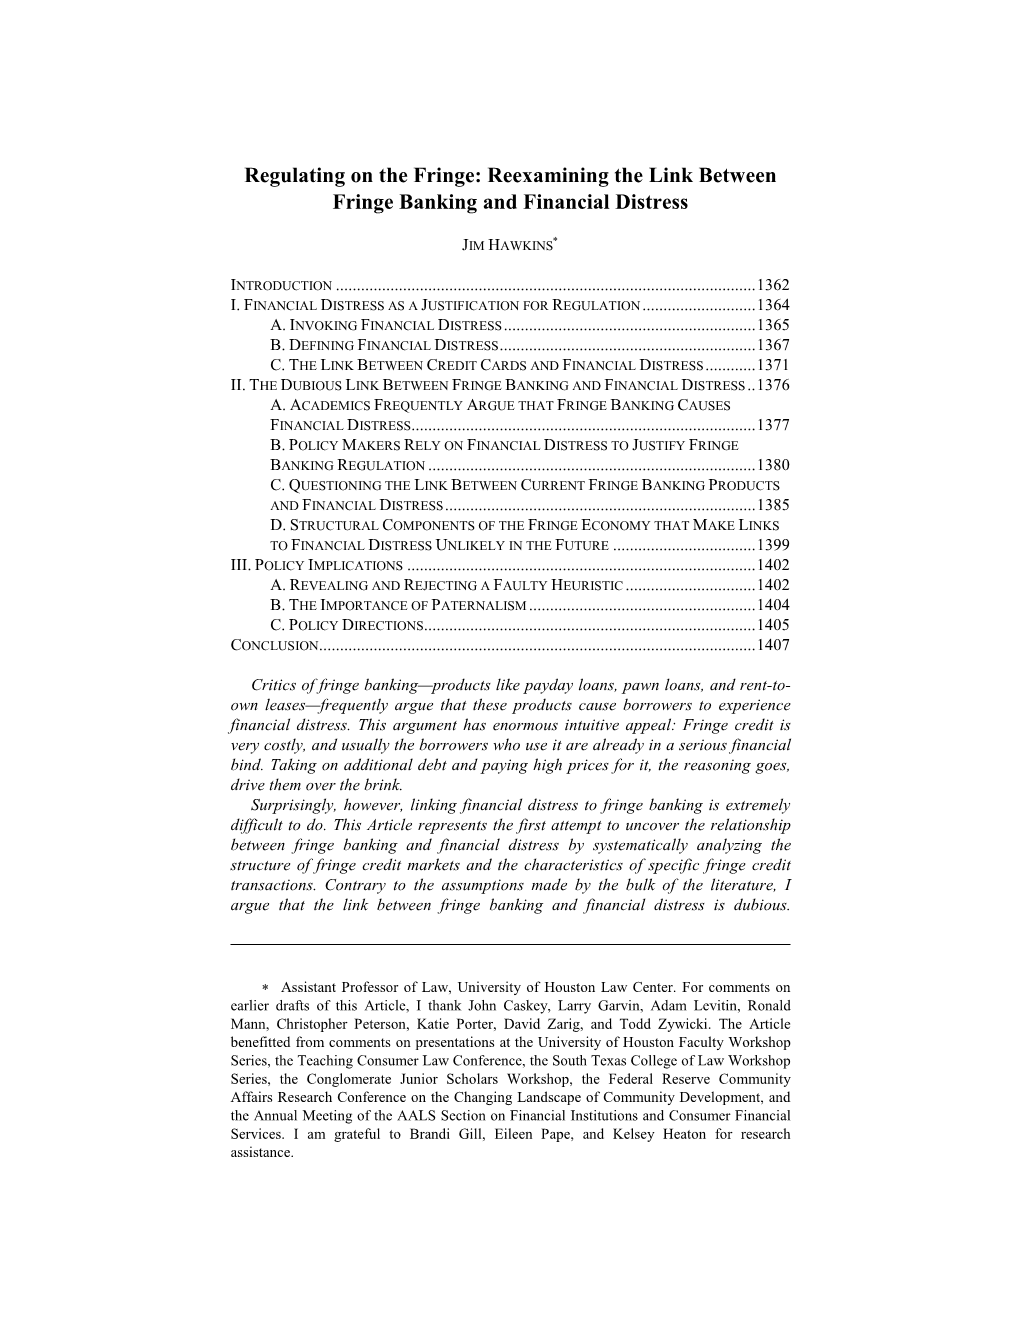 Regulating on the Fringe: Reexamining the Link Between Fringe Banking and Financial Distress